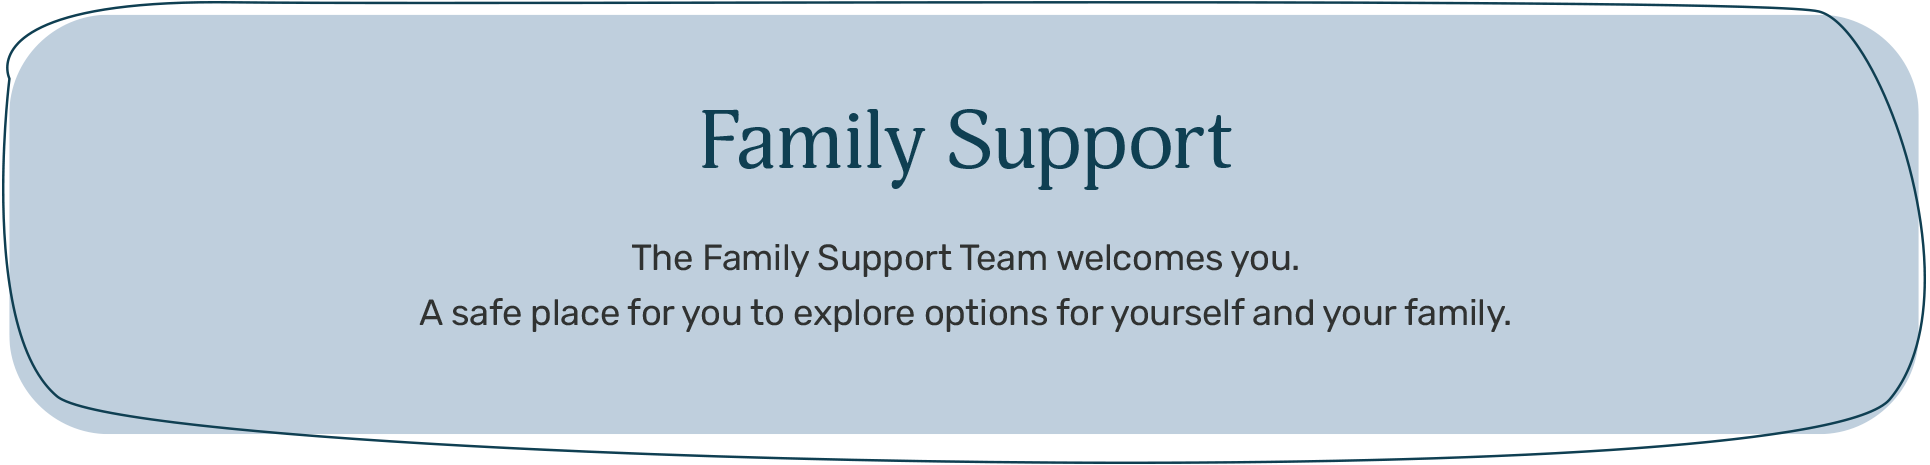 Kyogle Family Support Services - Family Support